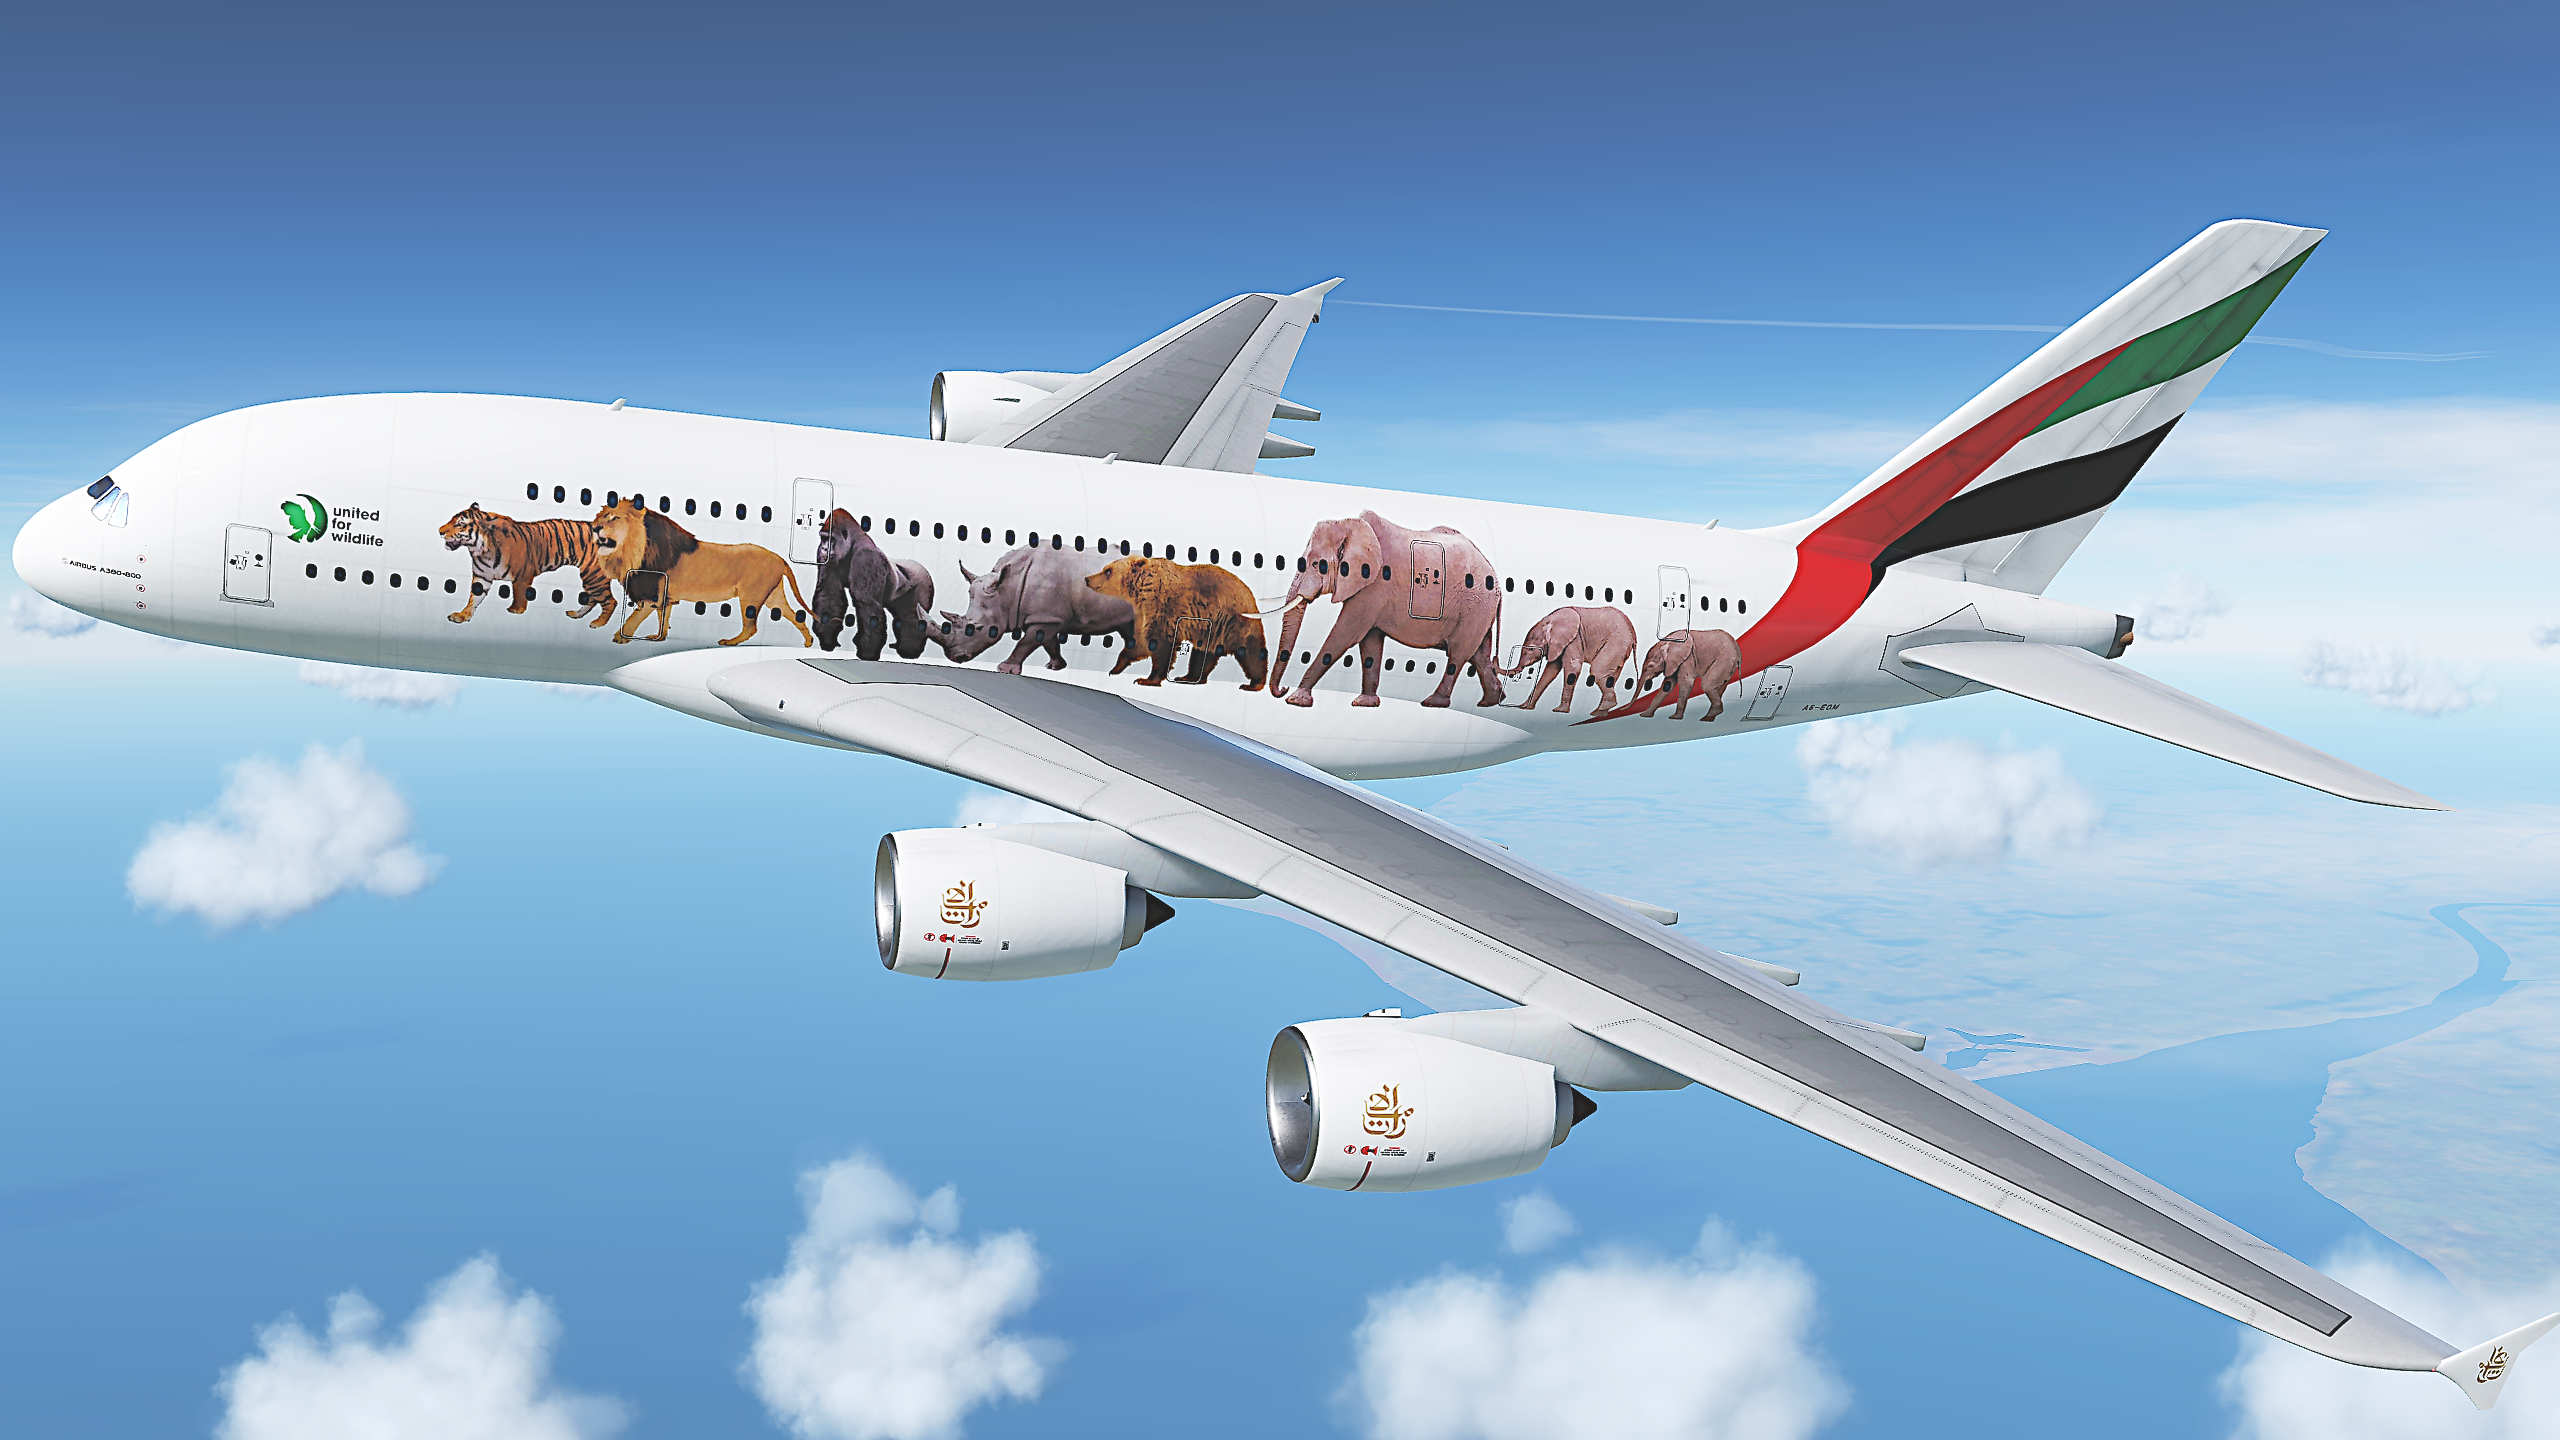 Airbus_A380 Emirates 'United for Wildlife' Serial Number...A6-EOM